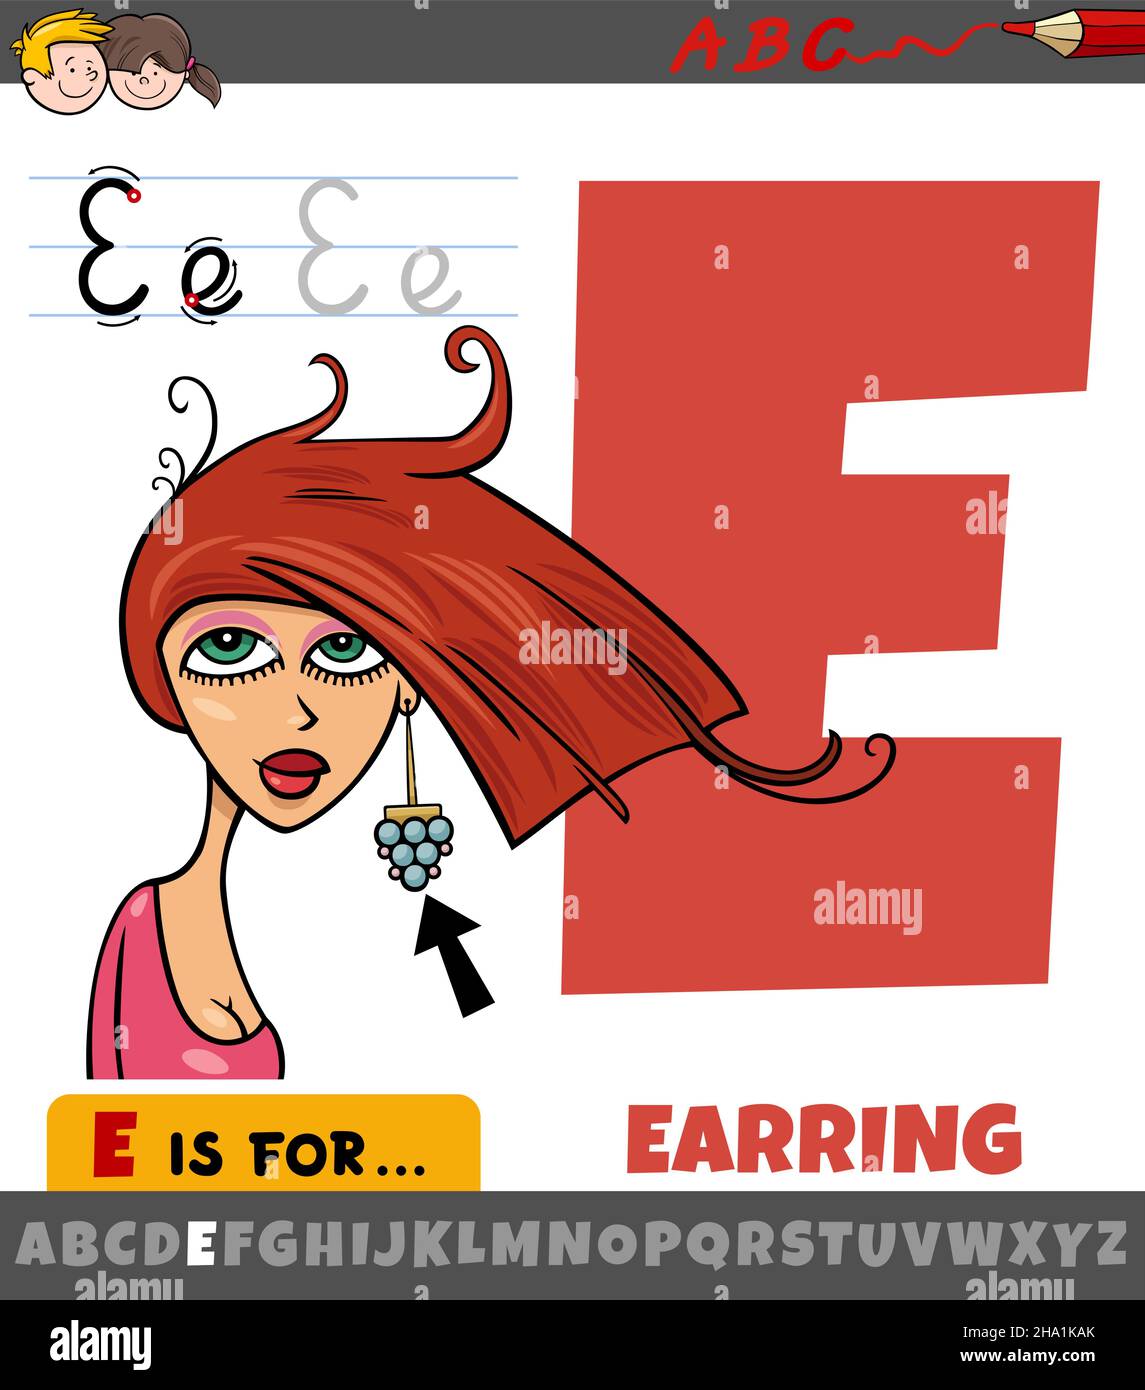 Educational cartoon illustration of letter E from alphabet with earring jewelry object Stock Vector